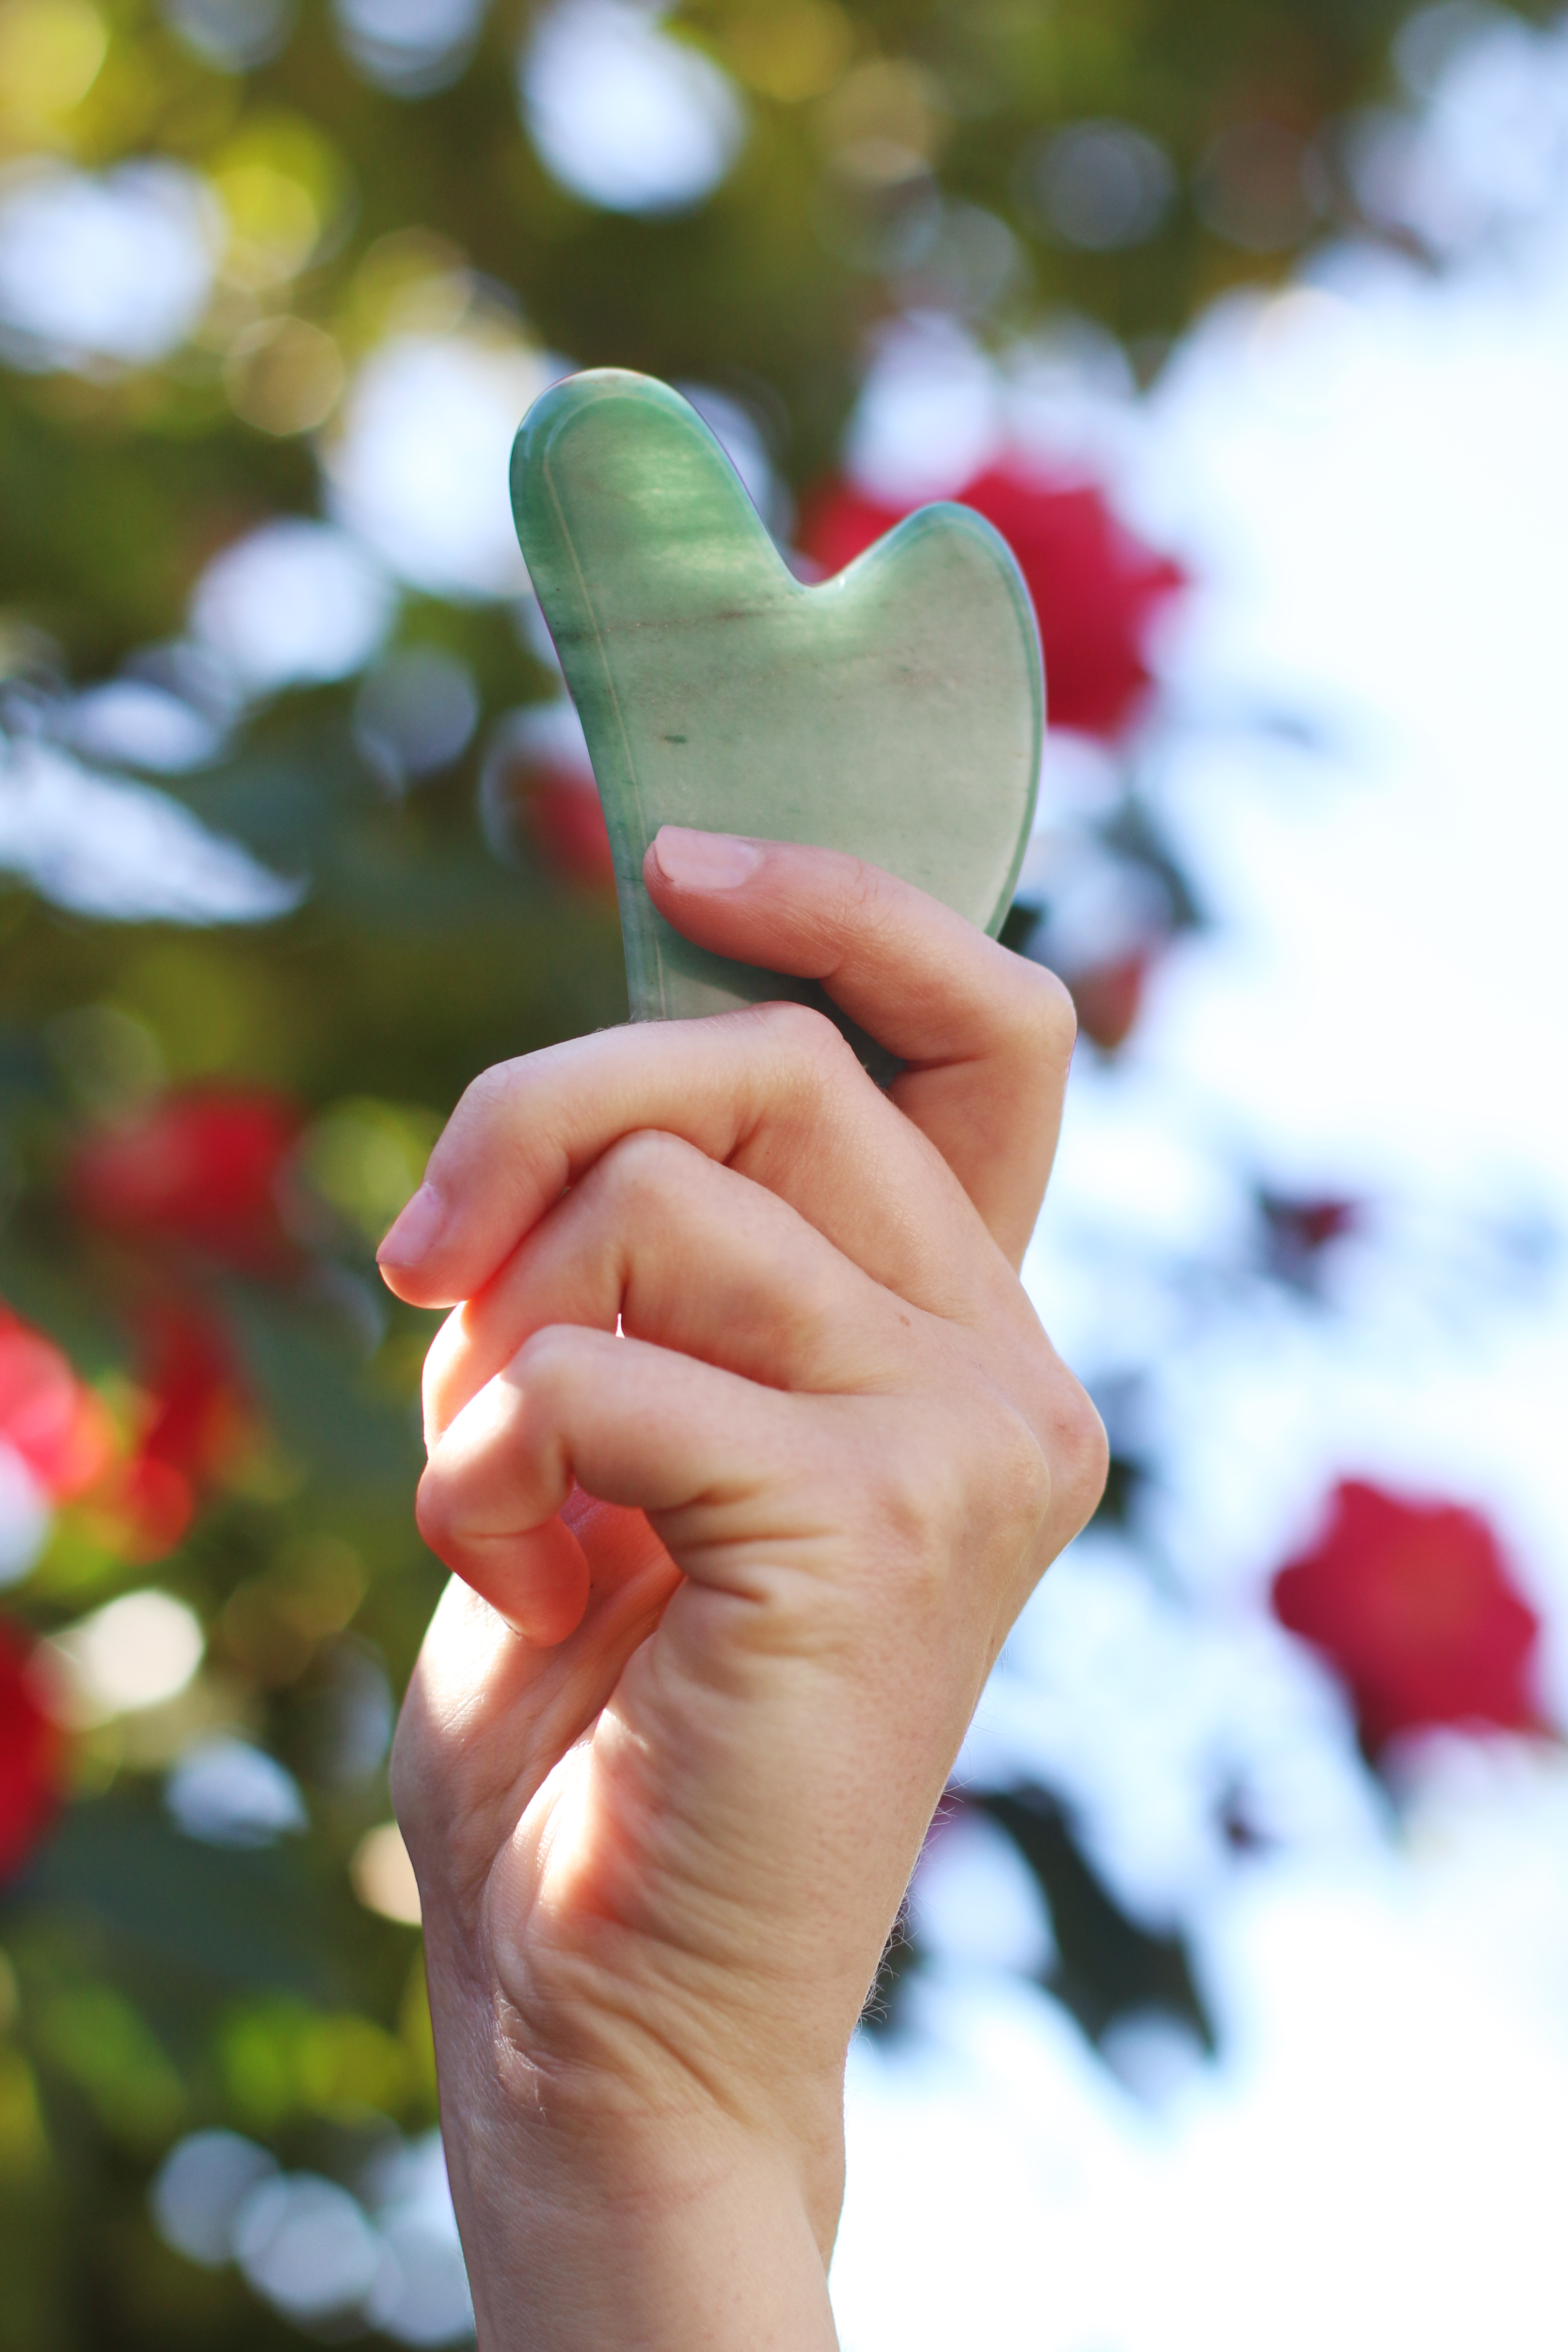 hand-holding-heart-shaped-green-gua-sha-chinese-massage-stone-for-lymphatic-massage-with-flowers-behind